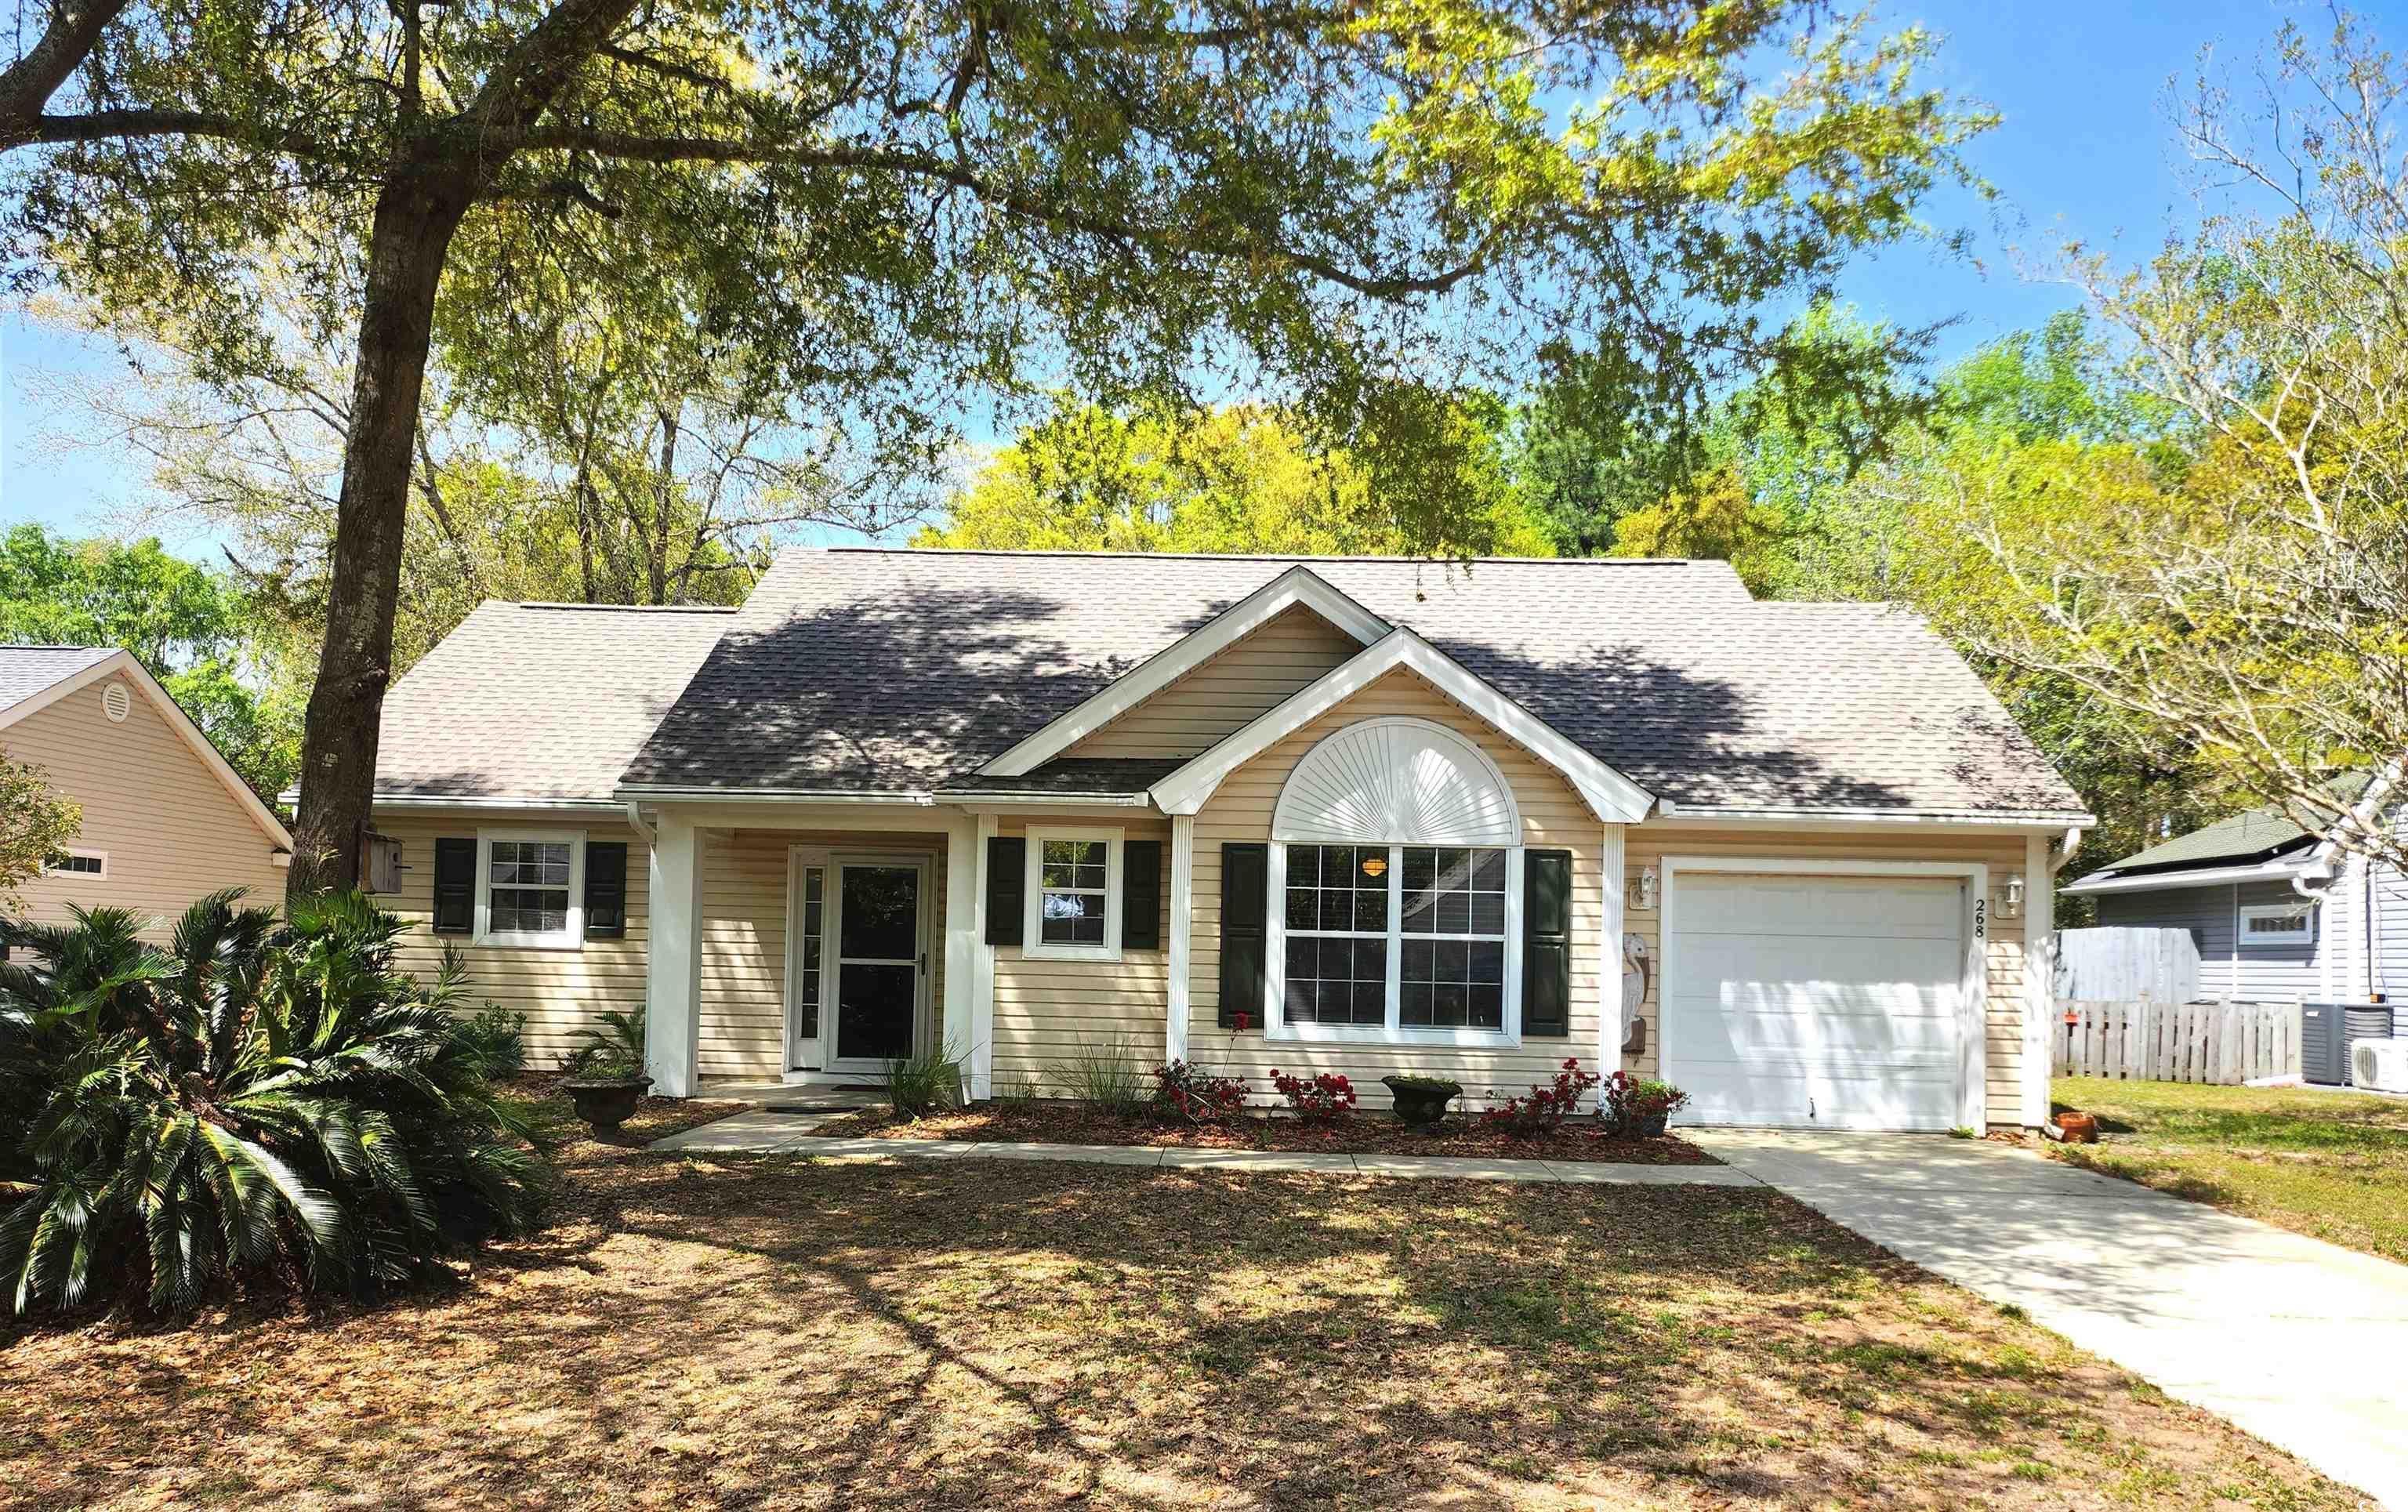 fantastic opportunity to live a golf cart/bike ride to the beach and marsh!! great neighborhood with mature trees, friendly neighbors, and very low hoa. located just off the south causeway, this home is close to grocery stores, restaurants, as well as all the shops and boutiques, and golf courses pawleys island has to offer. this 2 bedroom/2 bathroom home has been meticulously maintained. master bedroom also has a beautiful sunroom with a gorgeous wood ceiling with a basket-weave design. perfect for an office, reading area, or whatever! it backs up to a wooded area that cannot be built. so, if you are thinking of making pawleys island your permanent residence, or a vacation/2nd home, or even a rental investment (long-term -6 mo or longer), close to the beach, then this is what you're looking for!